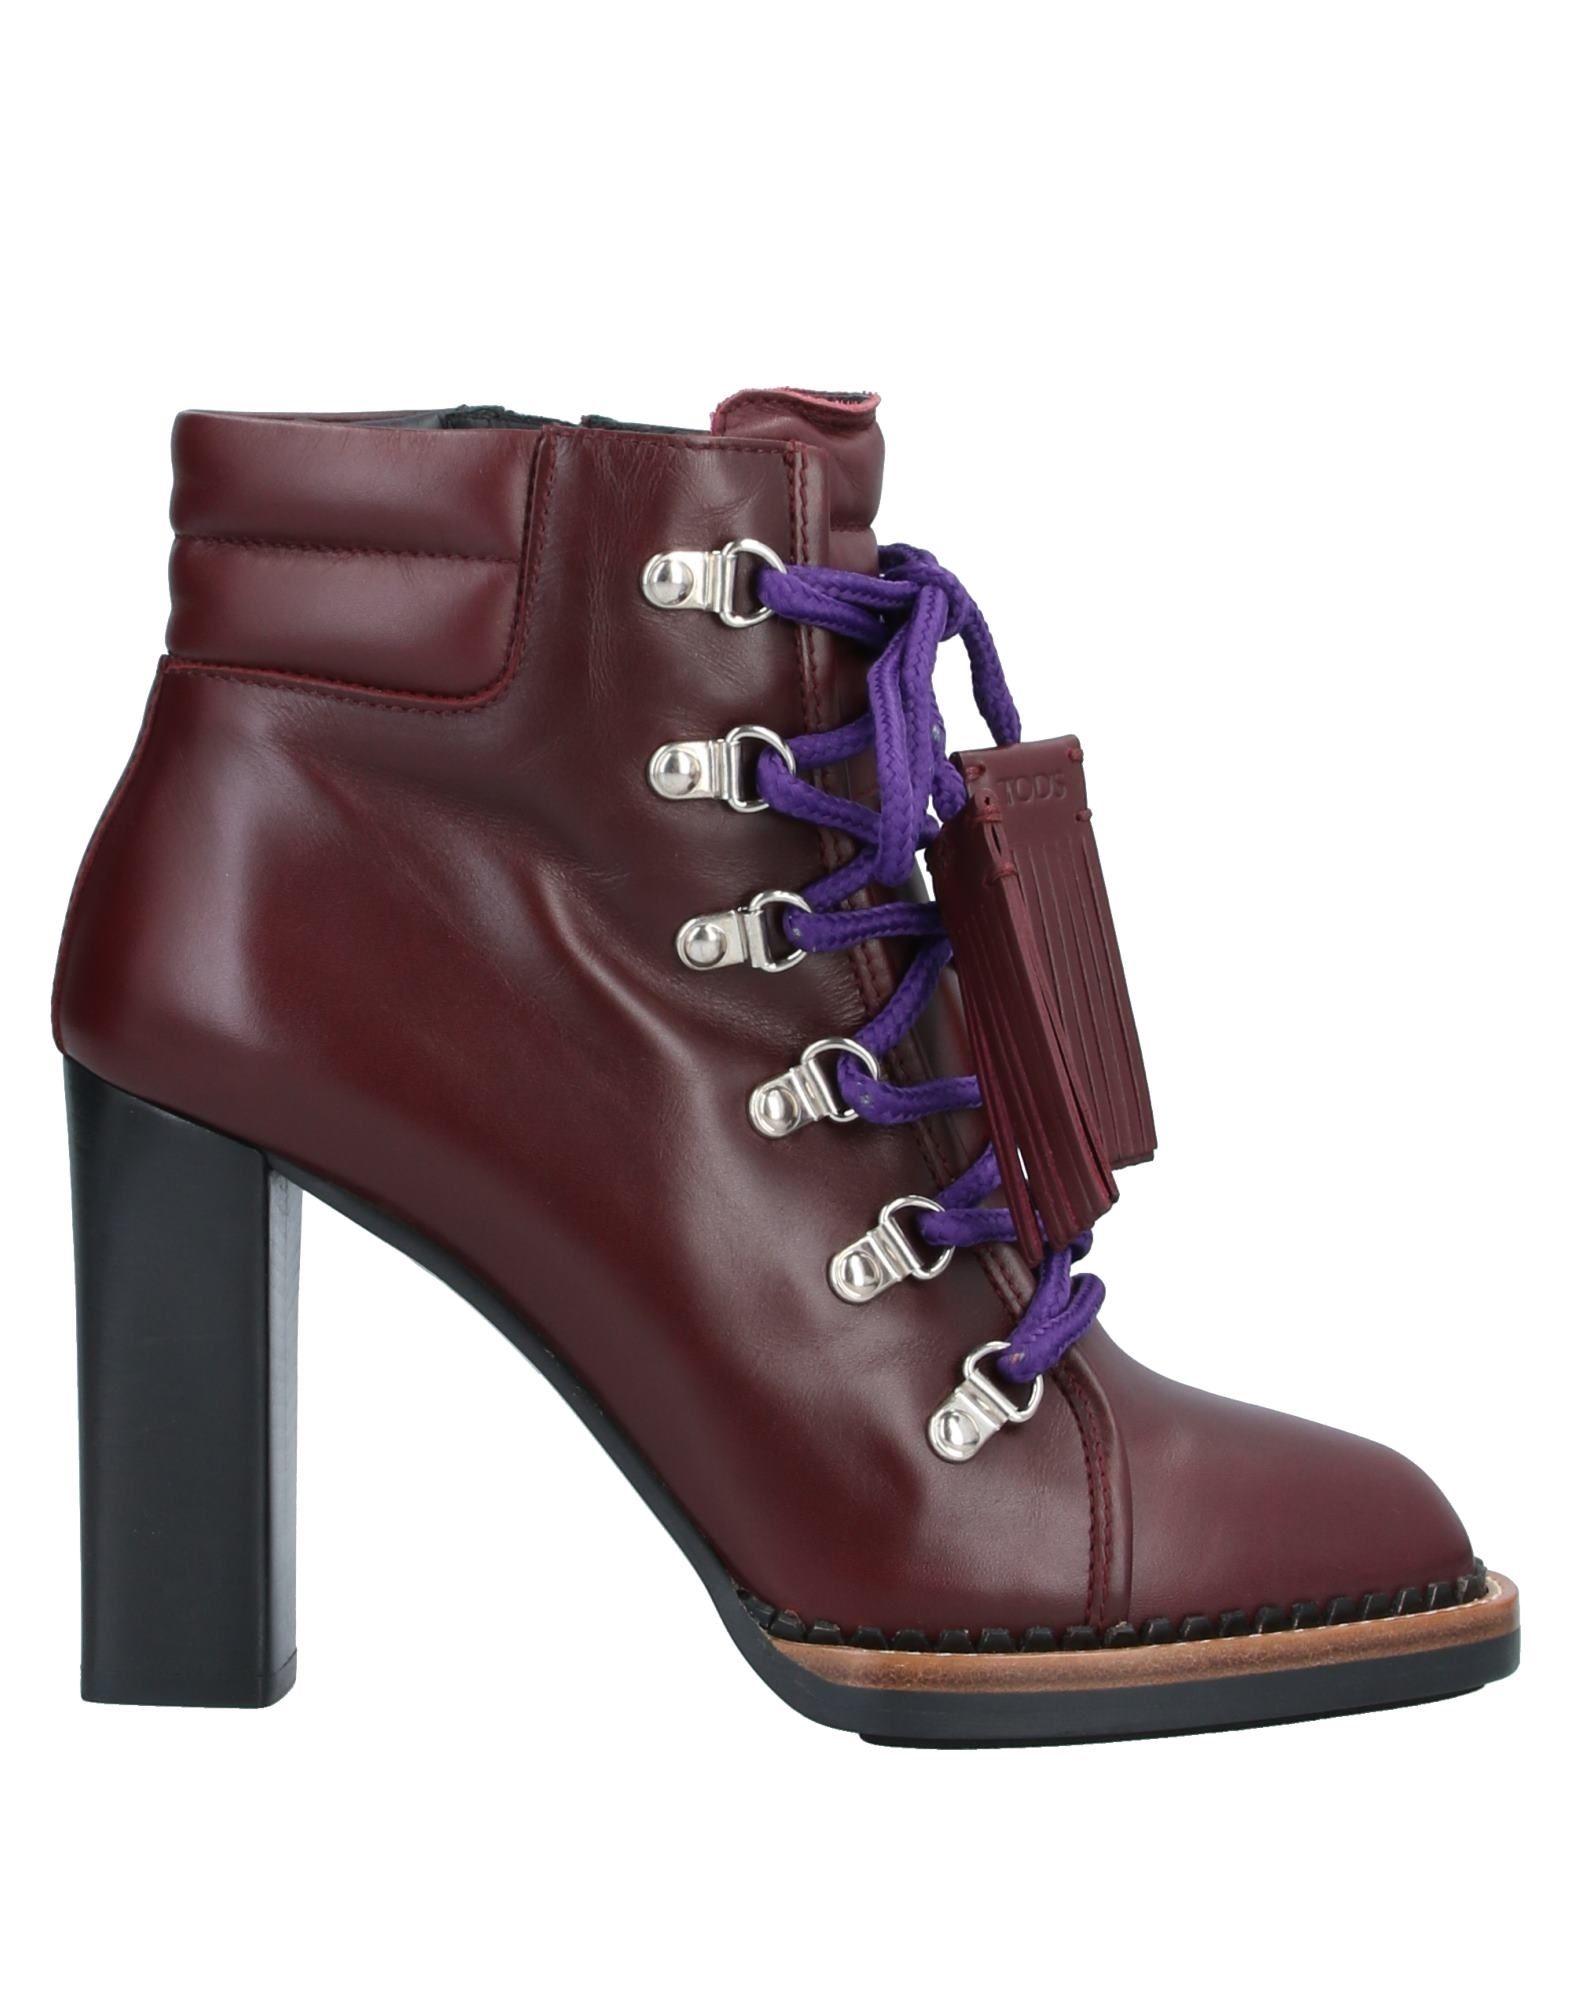 Tod's Leather Ankle Boots in Deep Purple (Purple) - Save 17% - Lyst